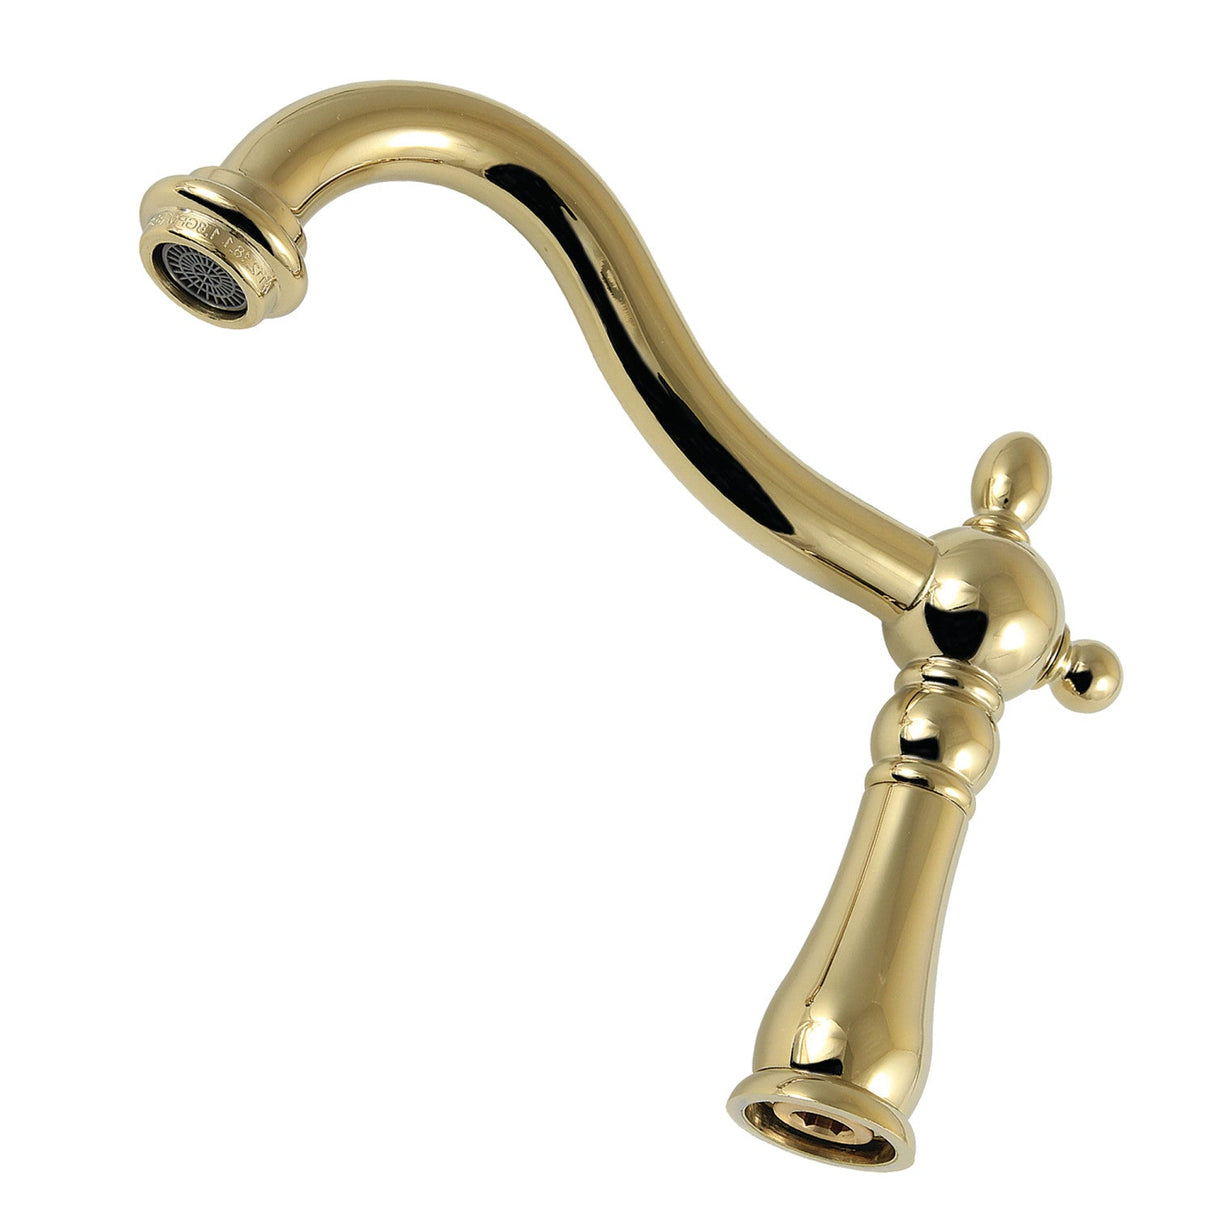 Heritage KSP1262 1.8 GPM 6-1/2 Inch Brass Faucet Spout, Polished Brass